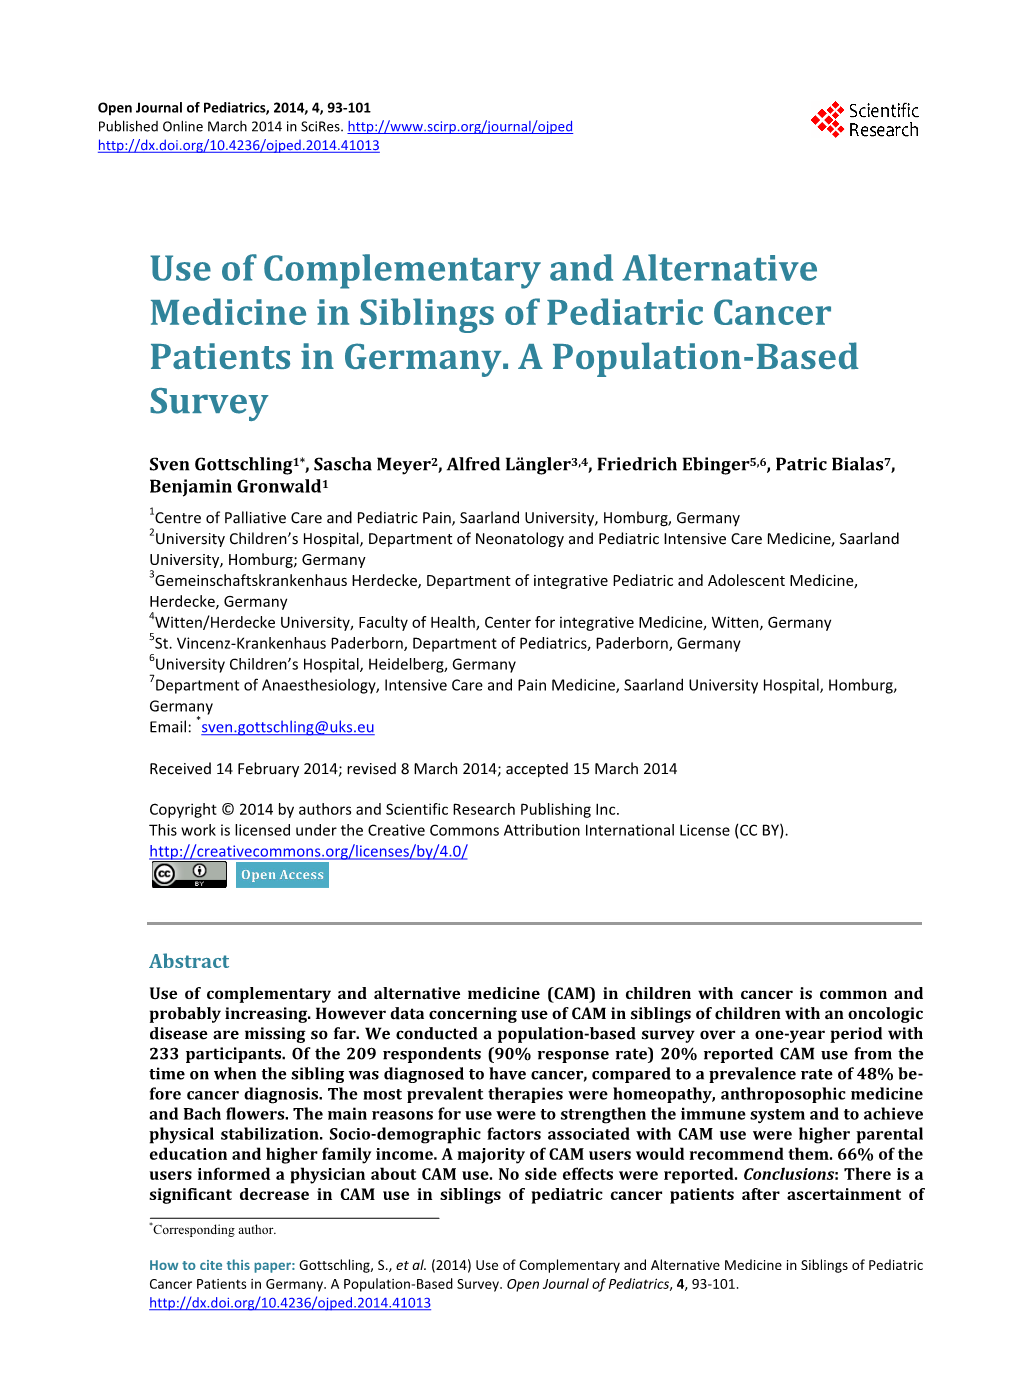 Use of Complementary and Alternative Medicine in Siblings of Pediatric Cancer Patients in Germany